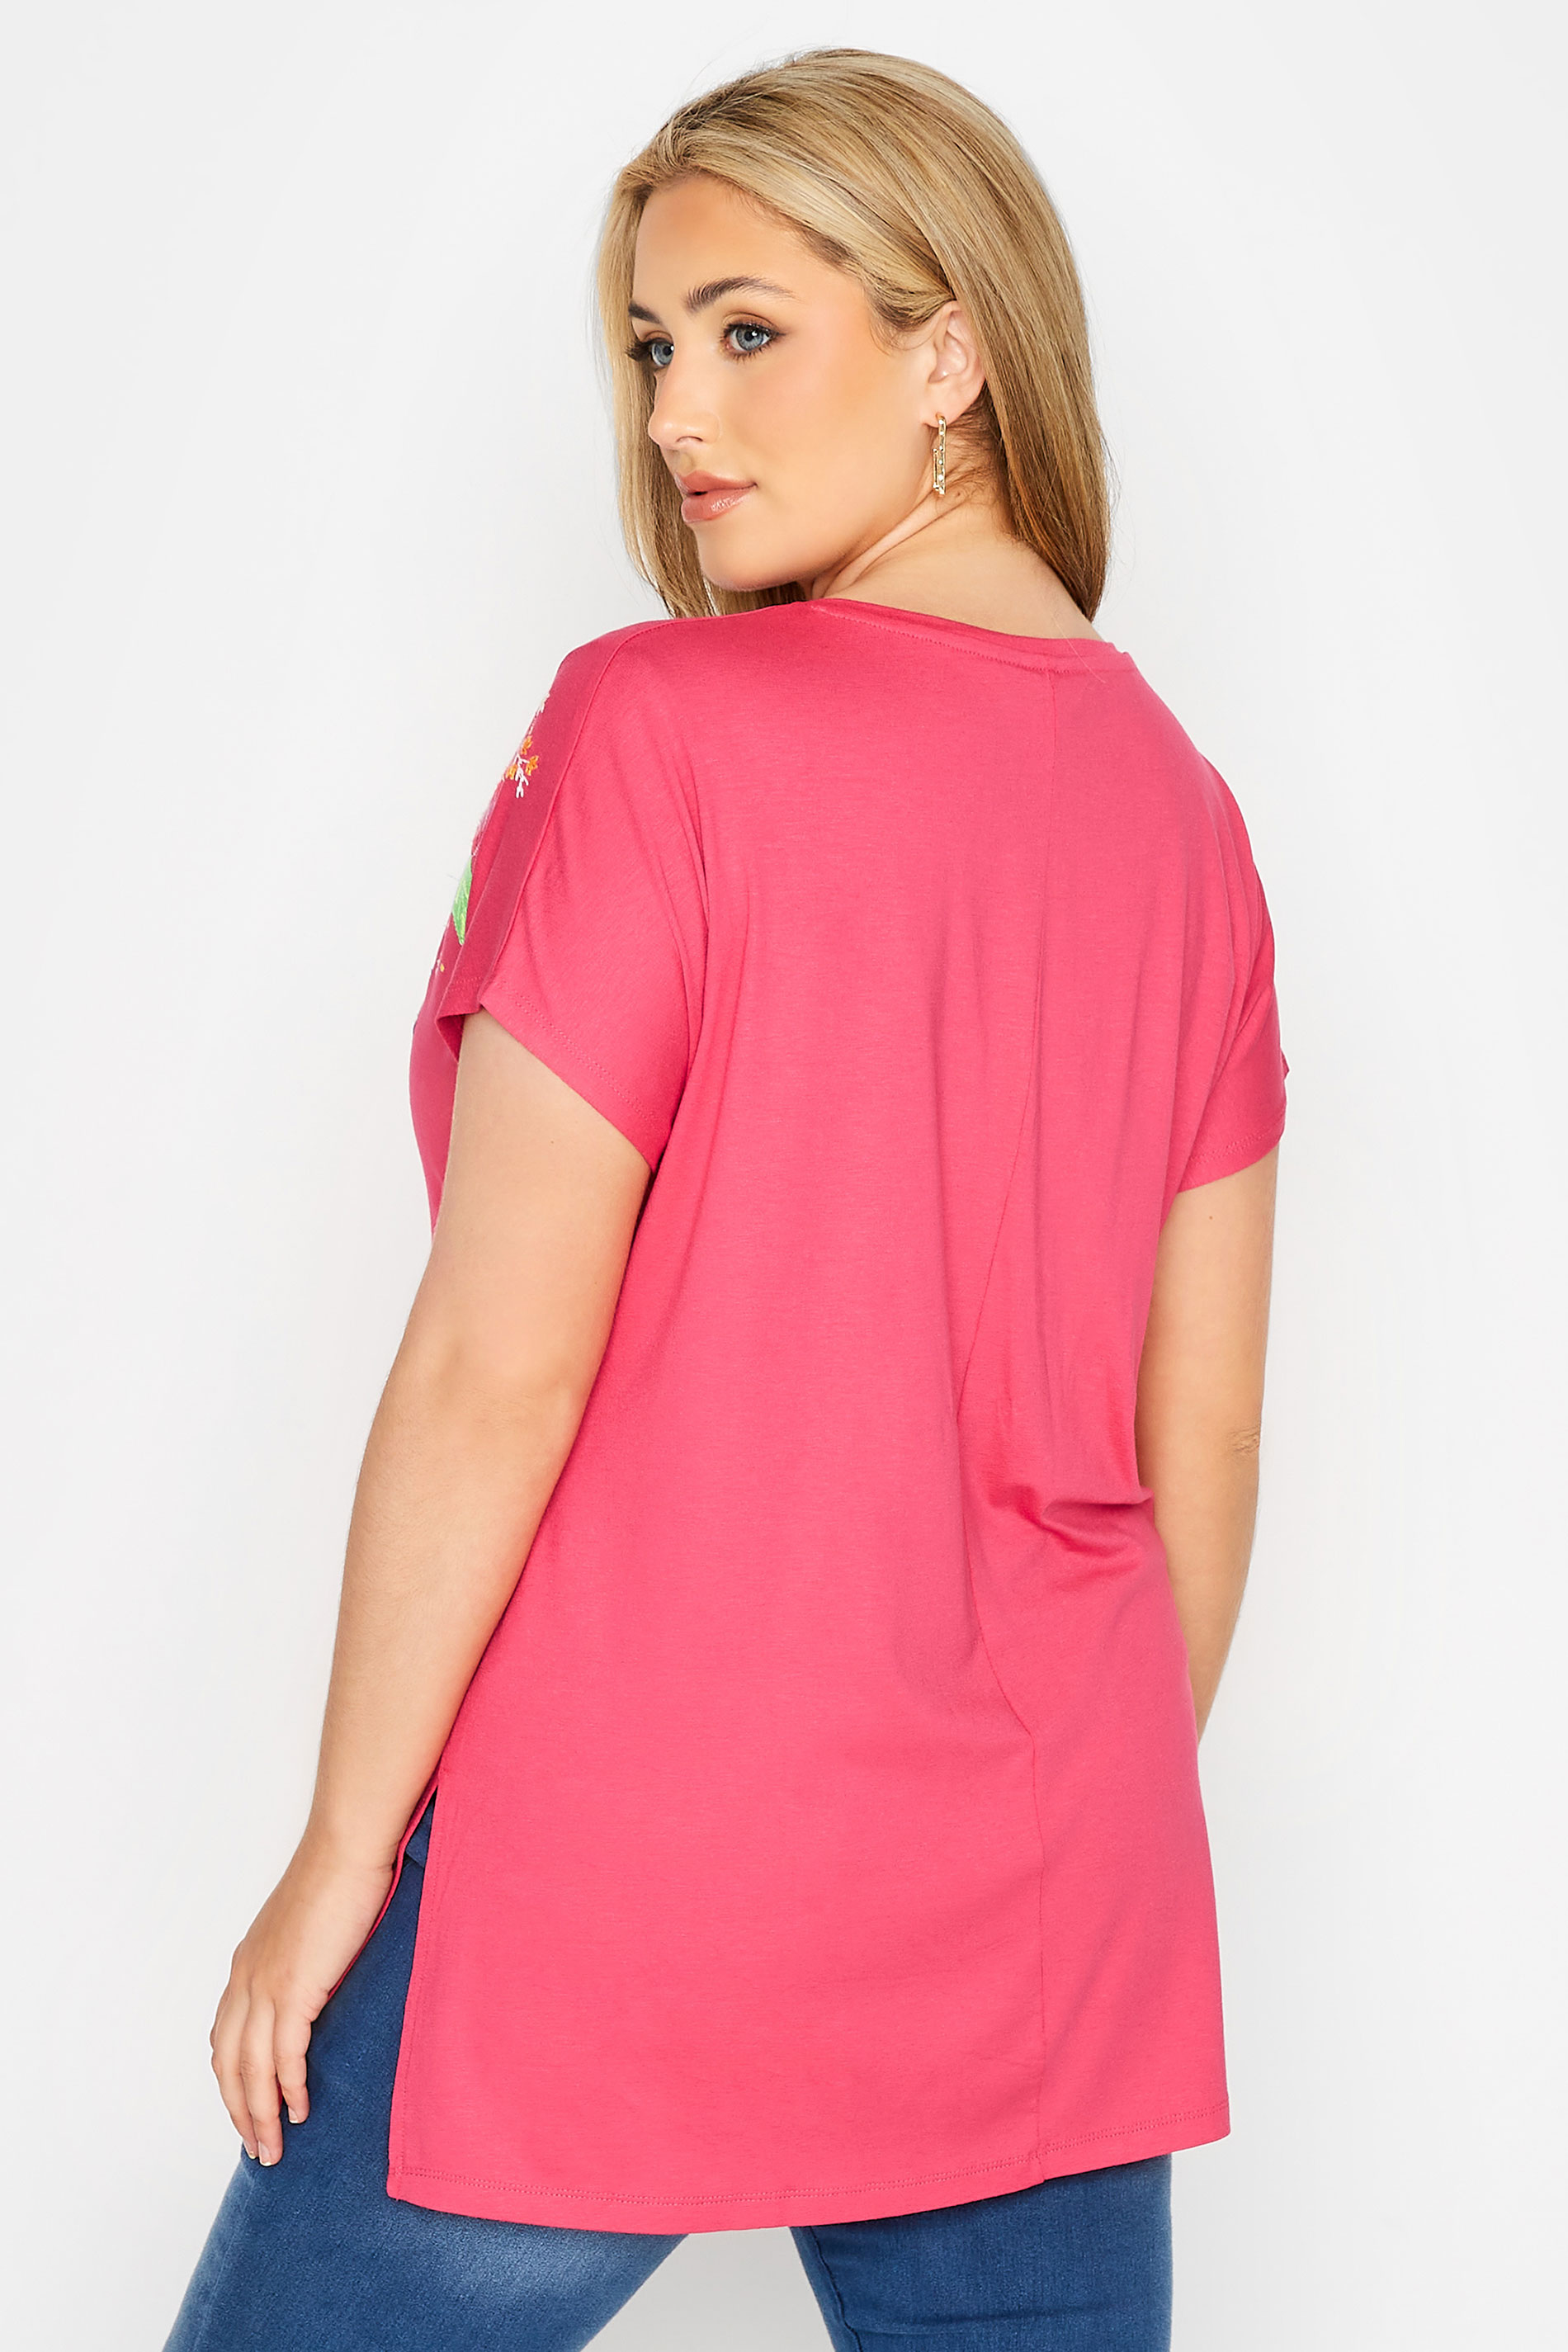 Grande taille  Tops Grande taille  T-Shirts | T-Shirt Rose Manches Courtes en Floral - NX68646